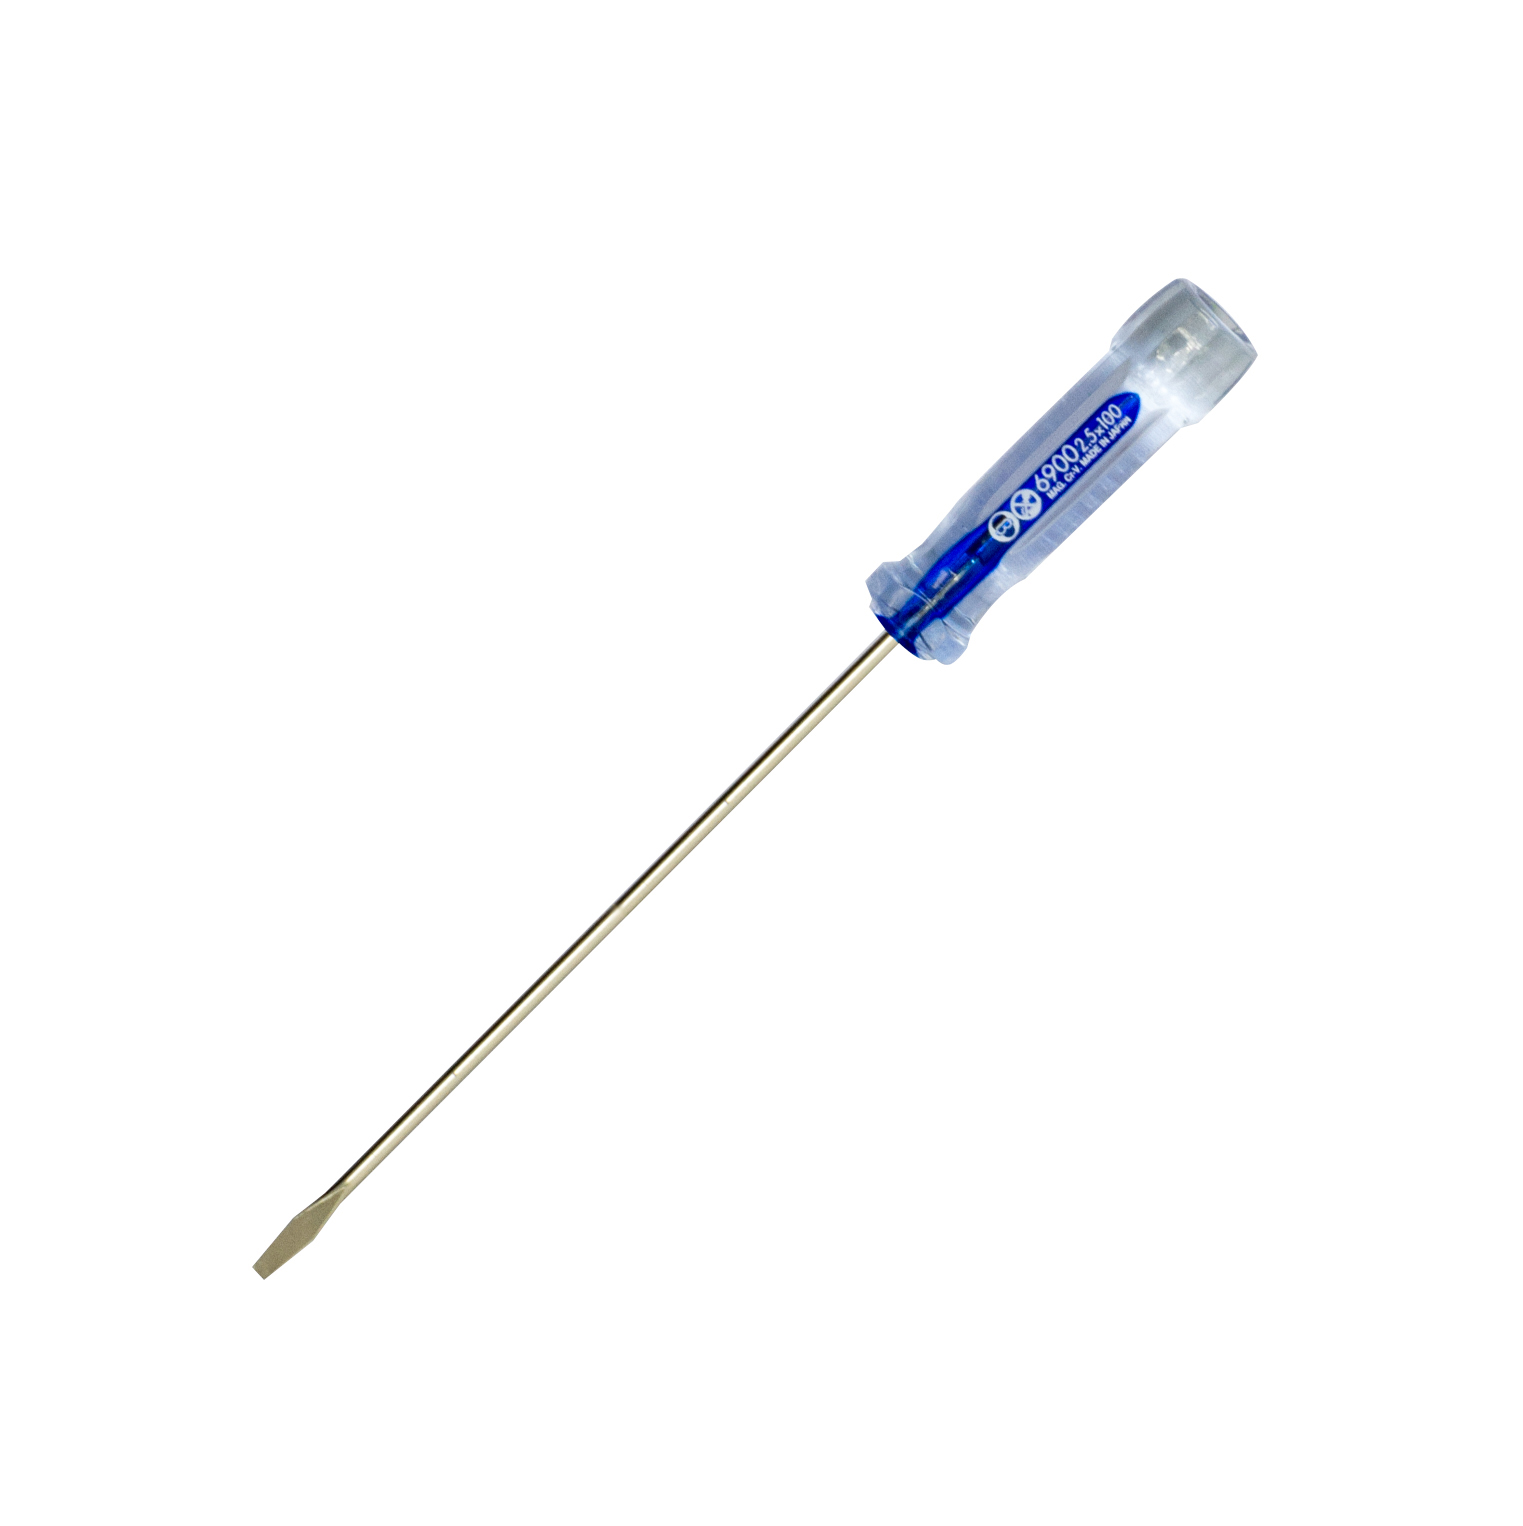 CRYSTALINE” Screwdriver (Precision Type) No.6900(Slotted 2.5 x 100